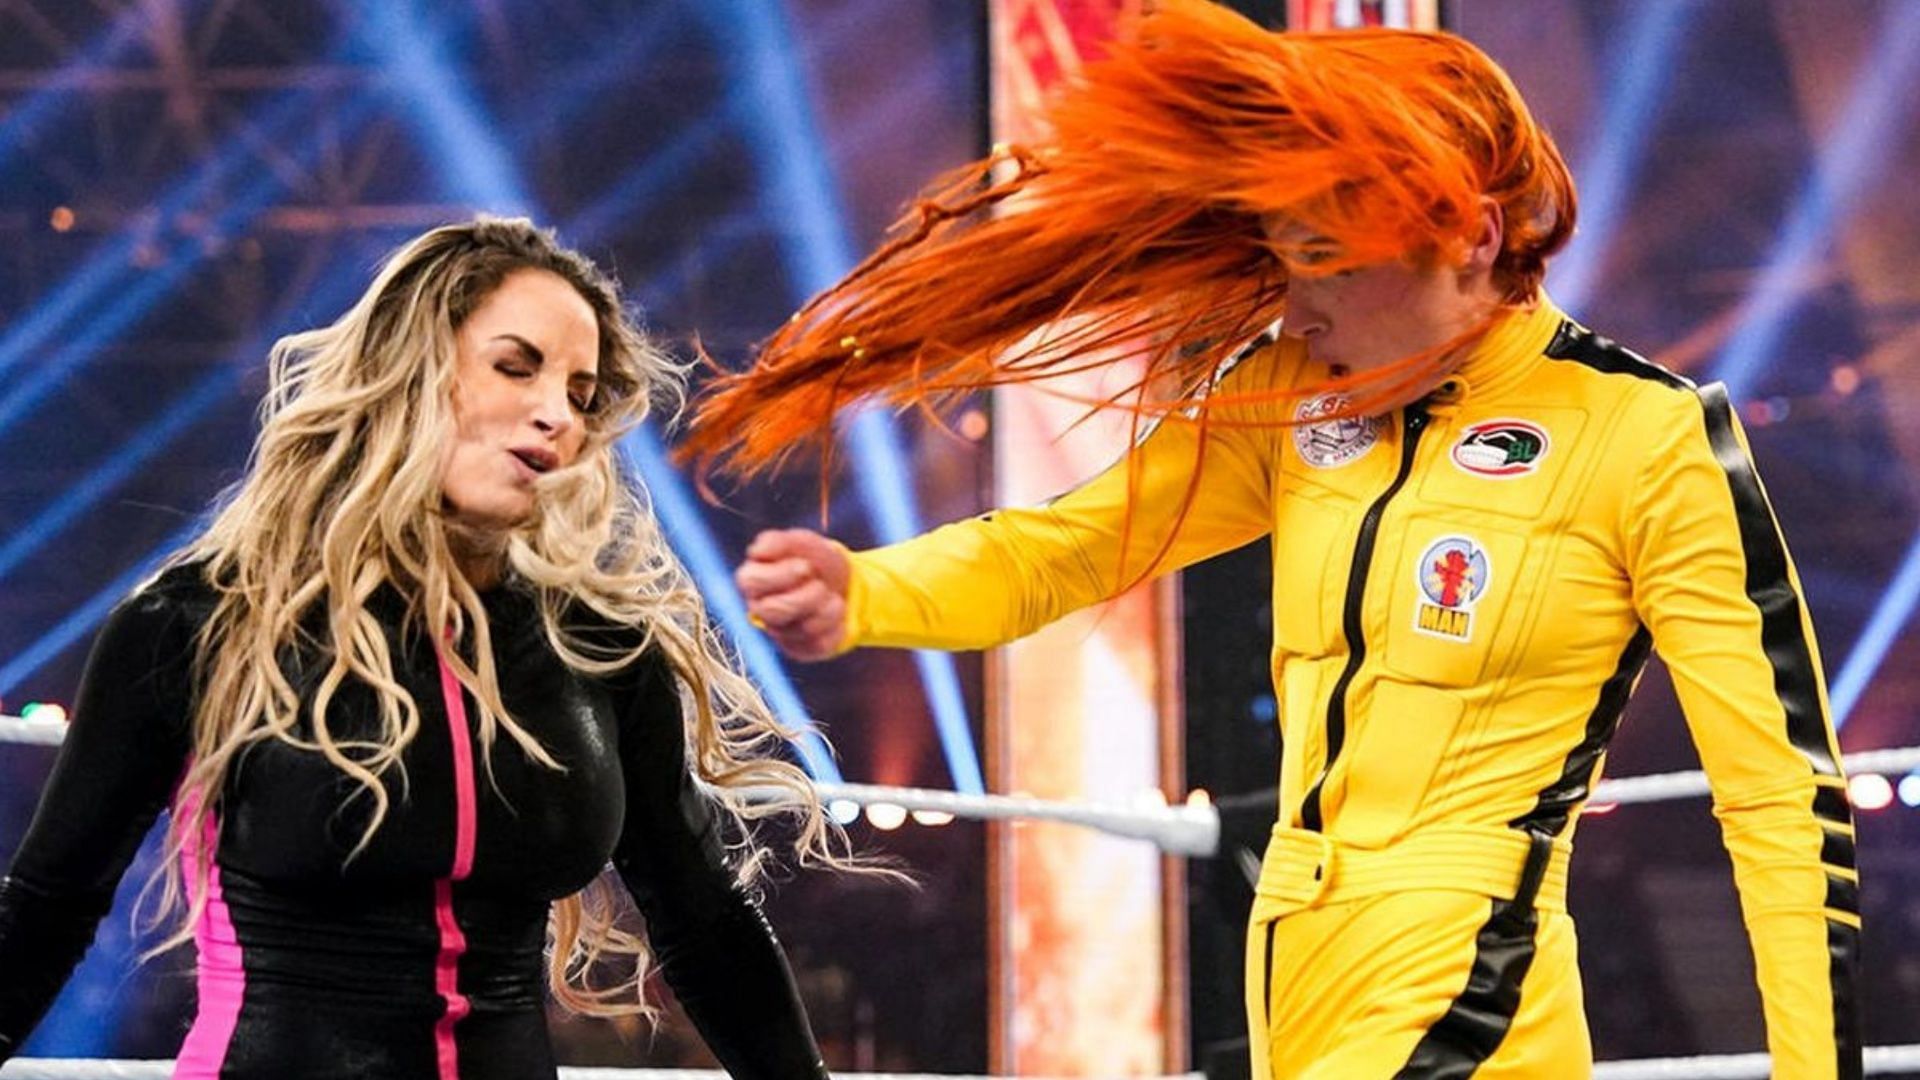 These two women were kept off the SummerSlam card.